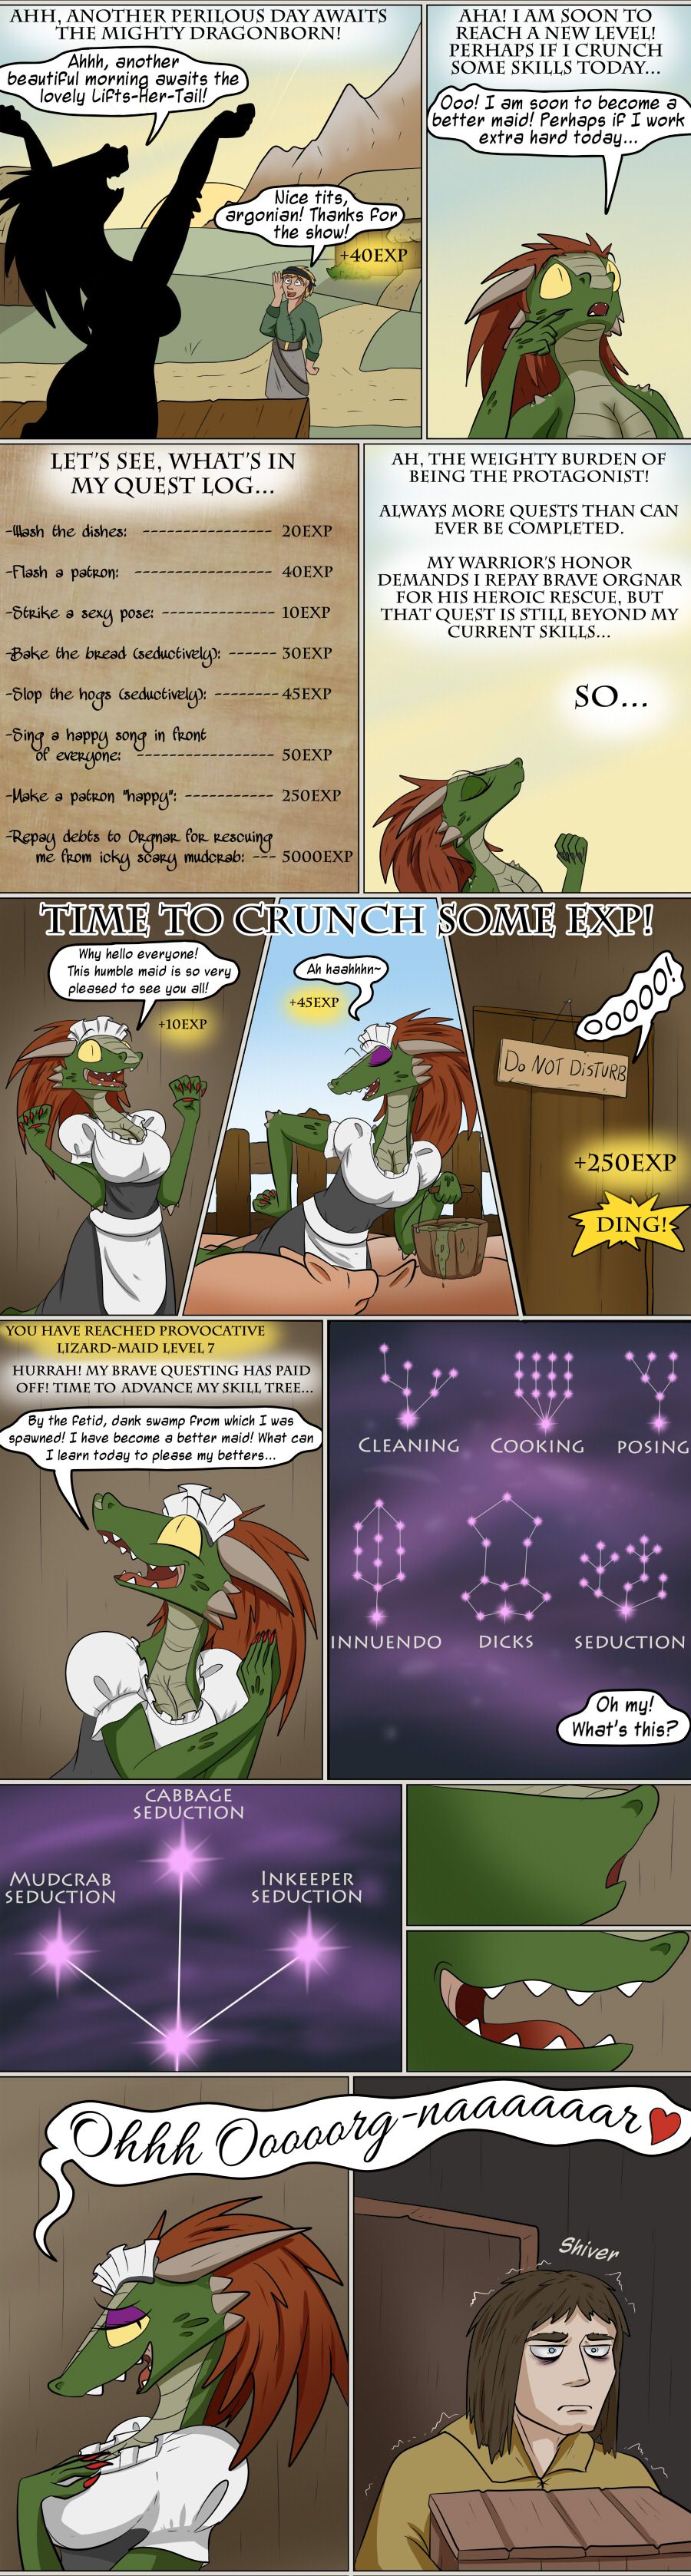 [Valsalia] Lusty Argonian Maid'd [Ongoing] 10